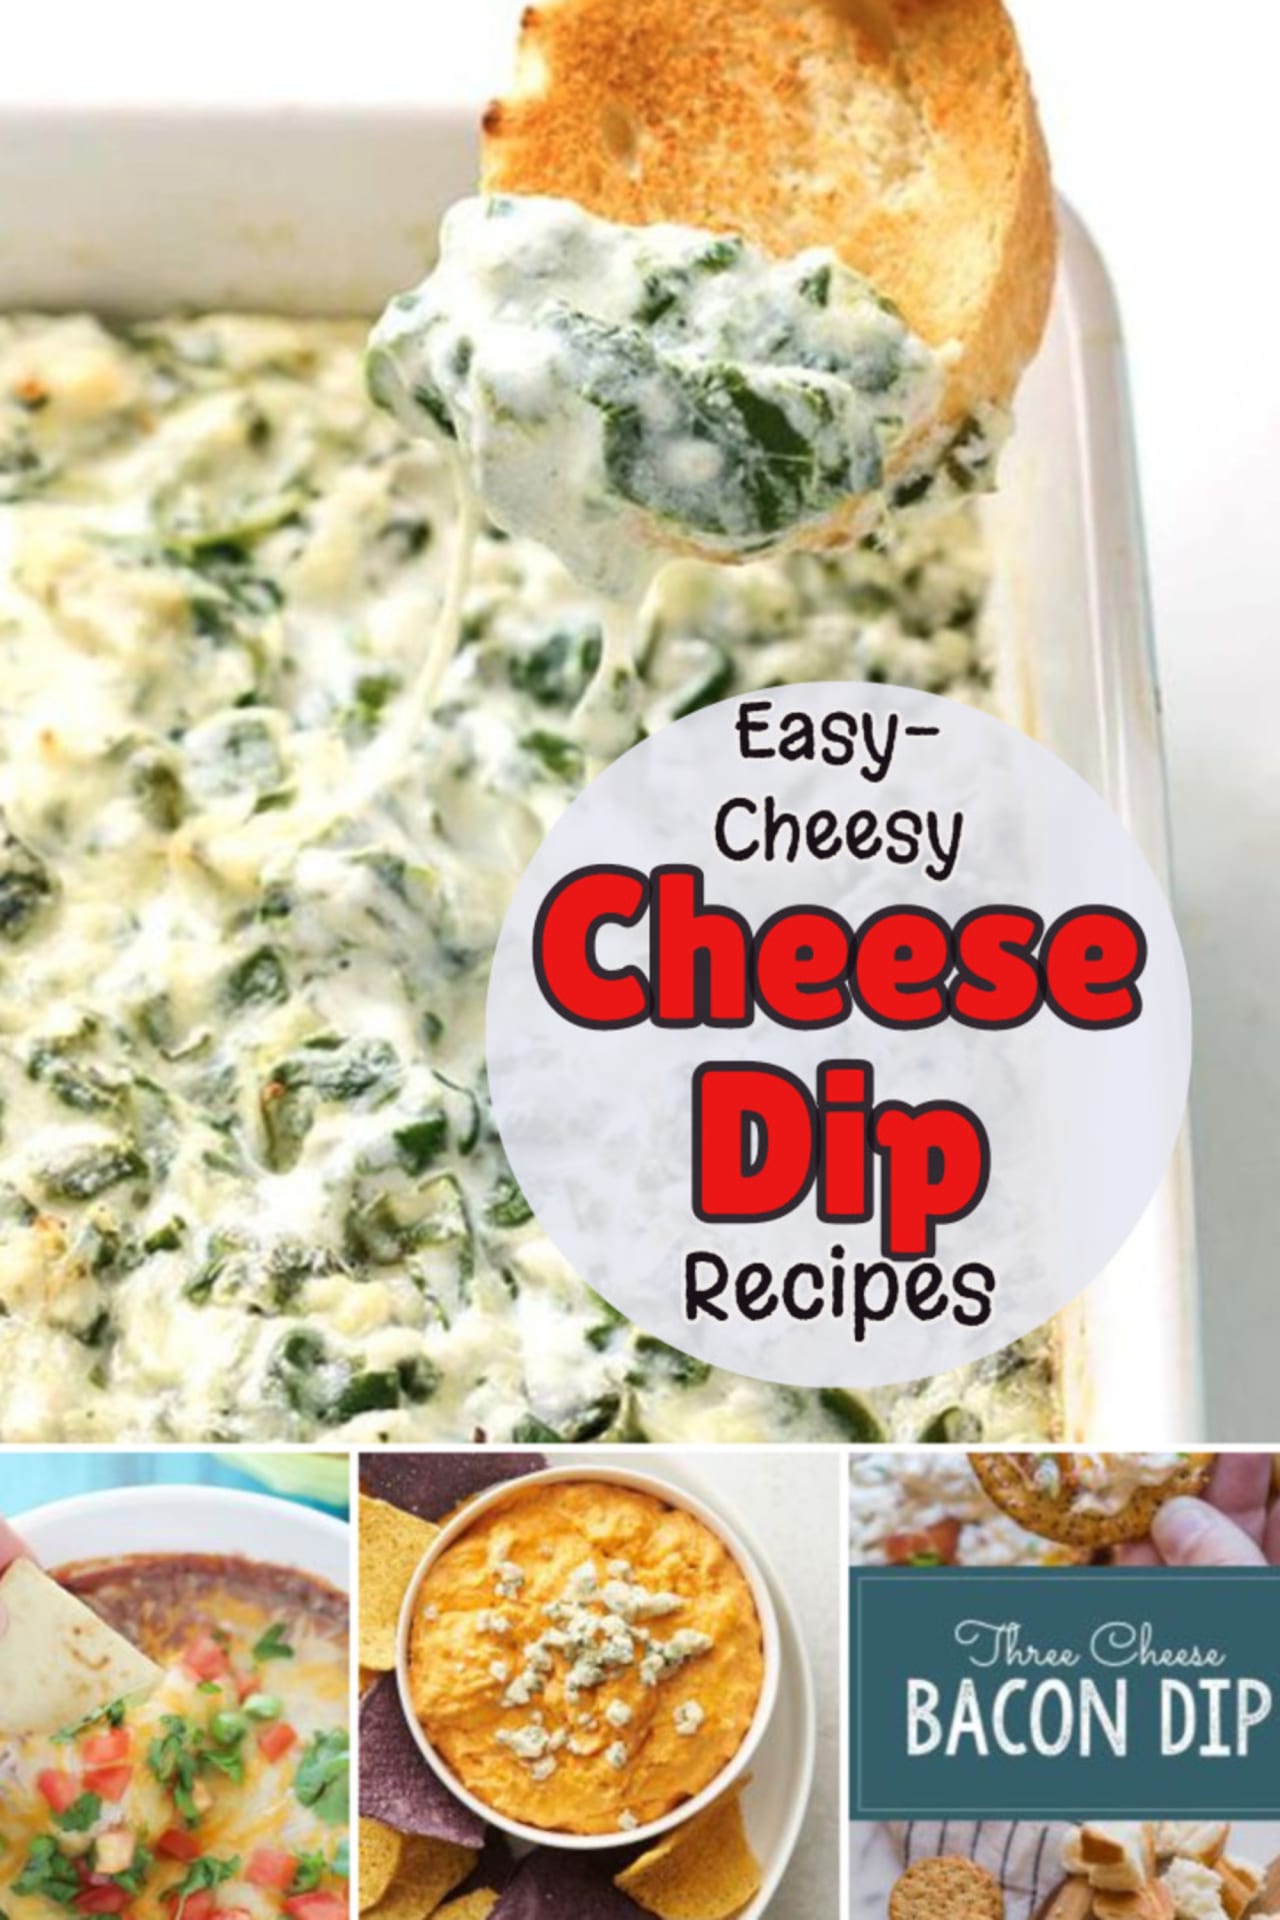 Easy cheese dip recipes for a crowd.  Easy Cheesy Cheese Dip Recipes - Great Appetizer Ideas!